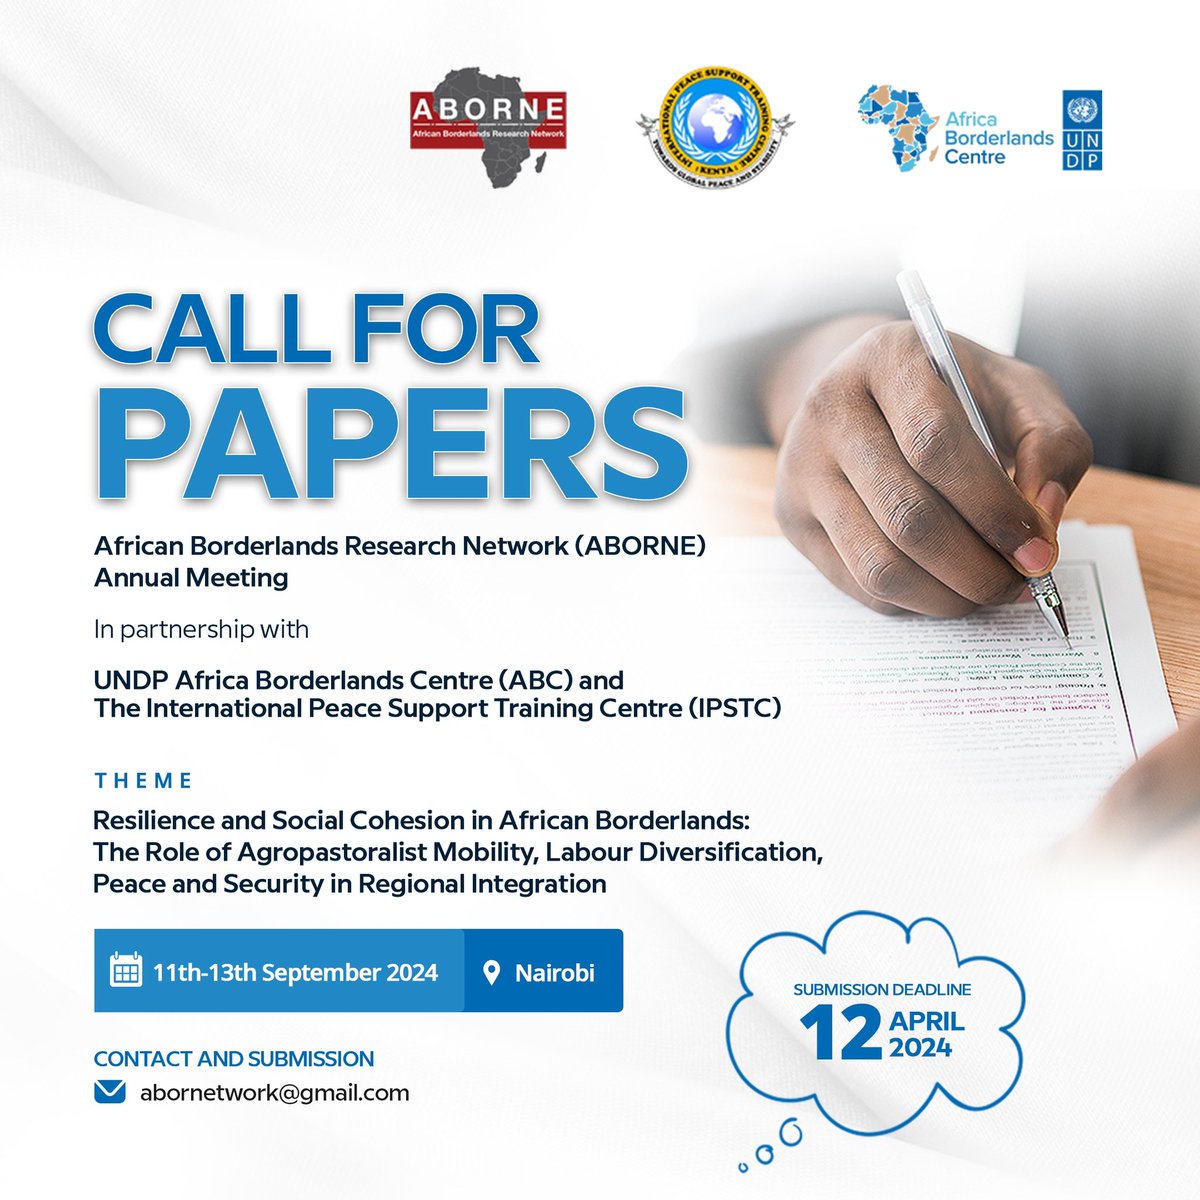 📢 Call for Papers! Join us for the @AborneNetwork Annual Meeting in partnership with @IPSTCKenya in Nairobi, 11-13 Sep 2024. Submit by 12 April 2024! 🌍✉️ abornetwork@gmail.com #ABORNE2024 #Research #AfricanBorderlands